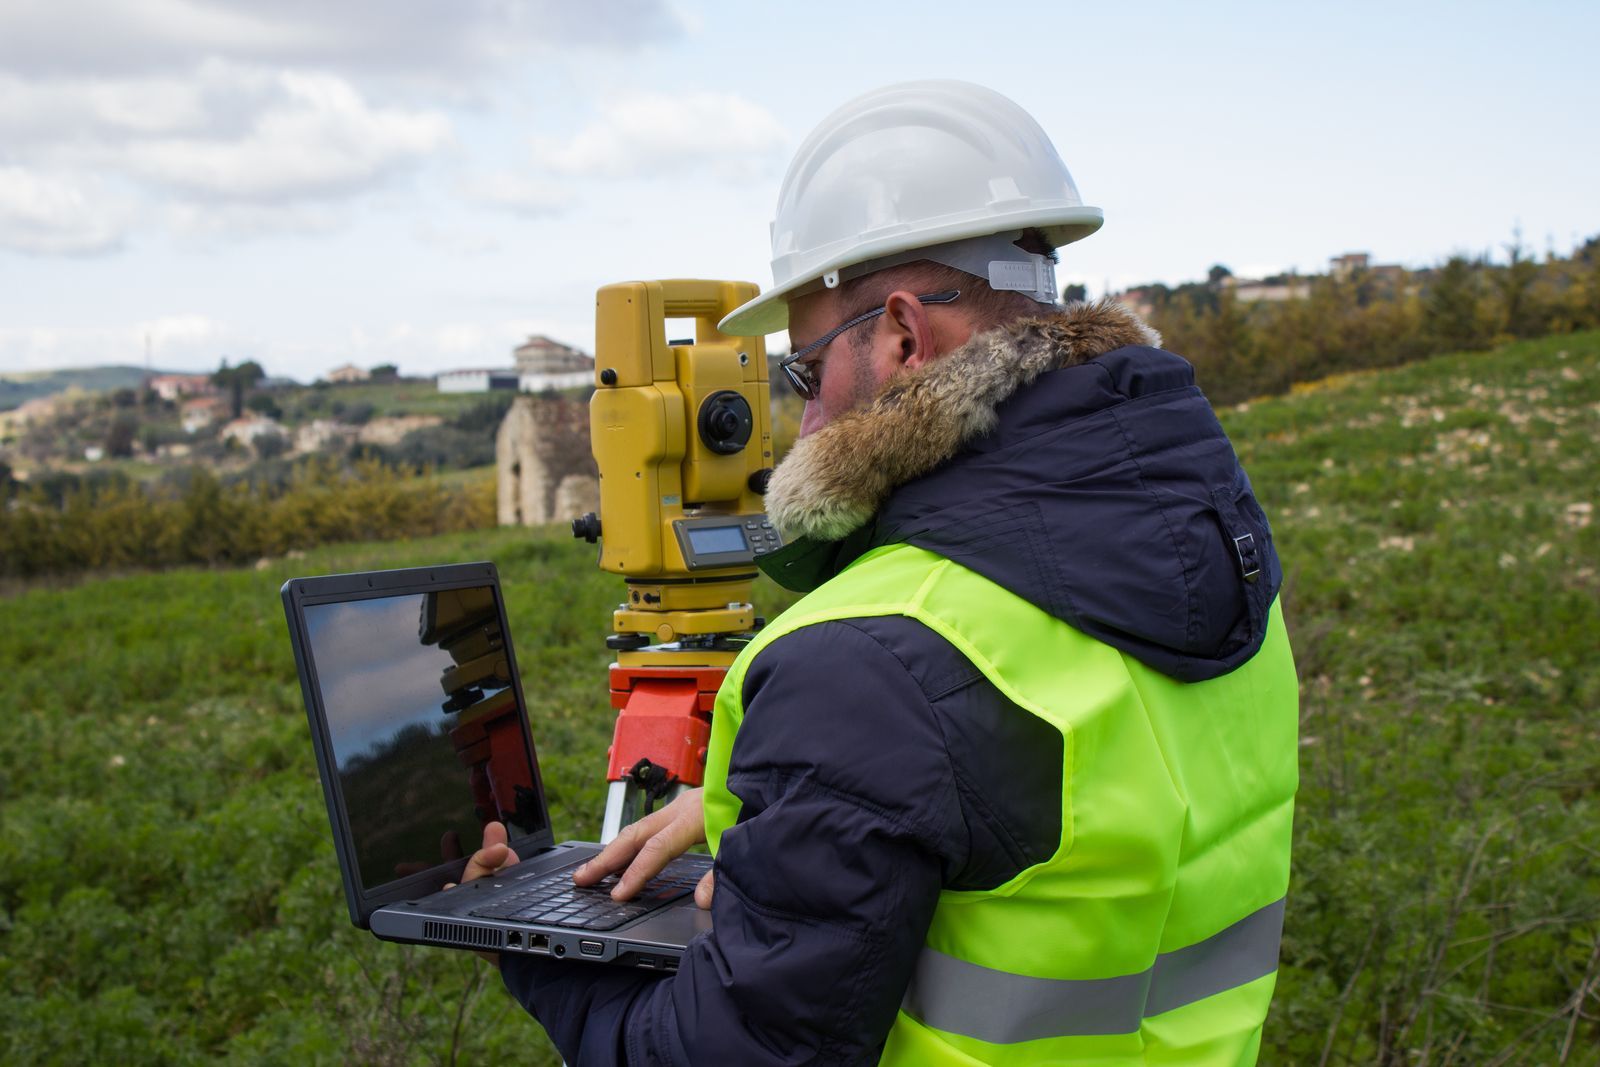 A professional surveyor, equipped with a laptop, utilizes Theodolite to conduct modern surveying